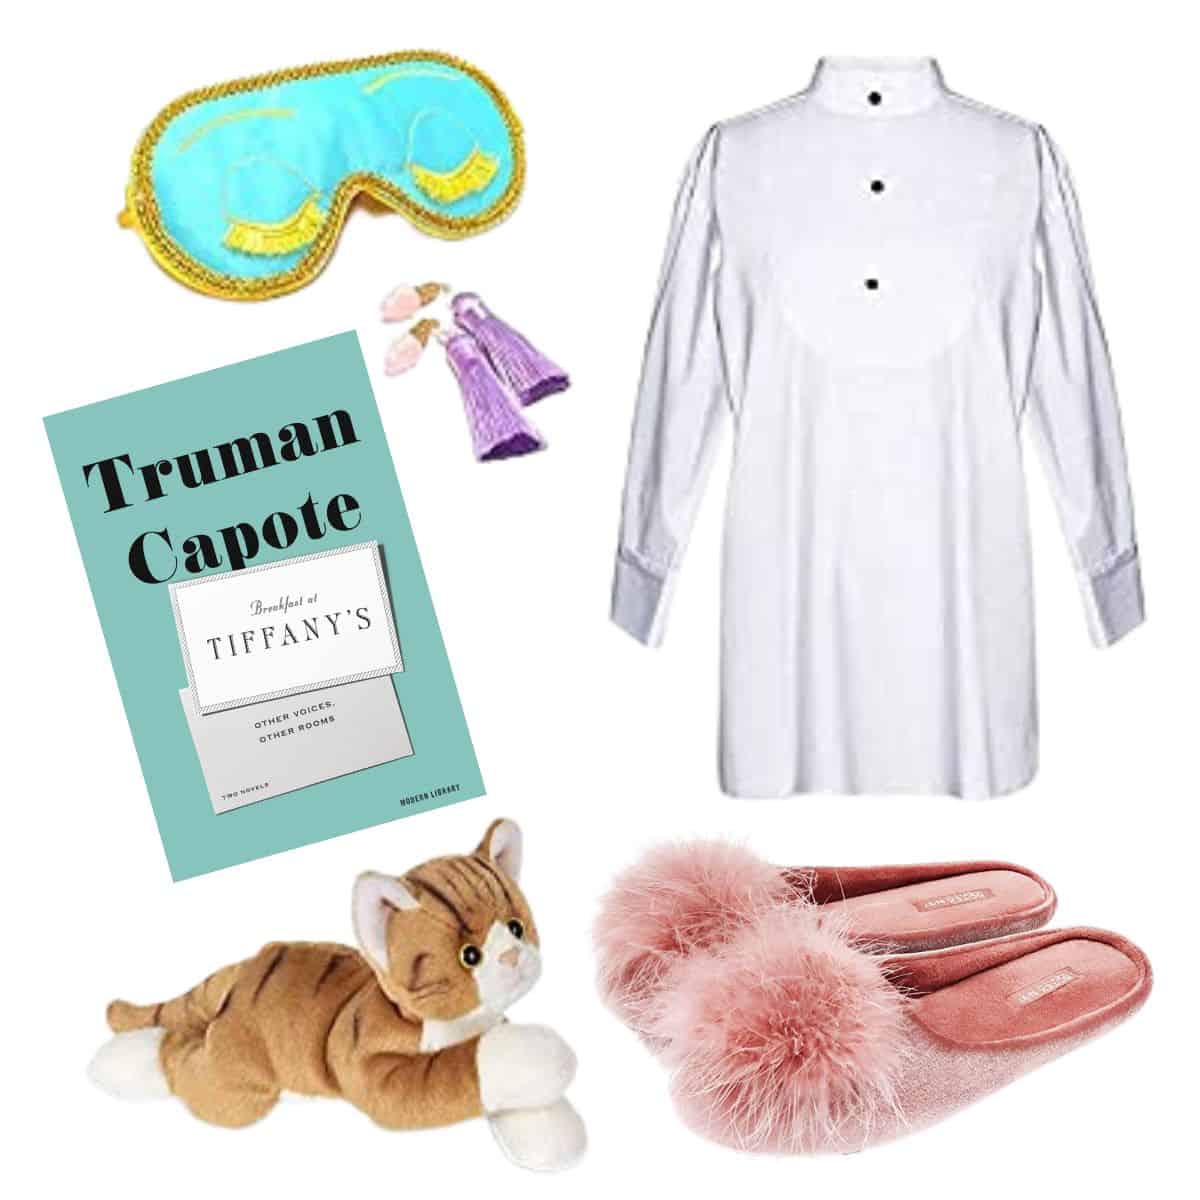 Holly Golightly Sleep Costume with Mask from Breakfast at Tiffany’s